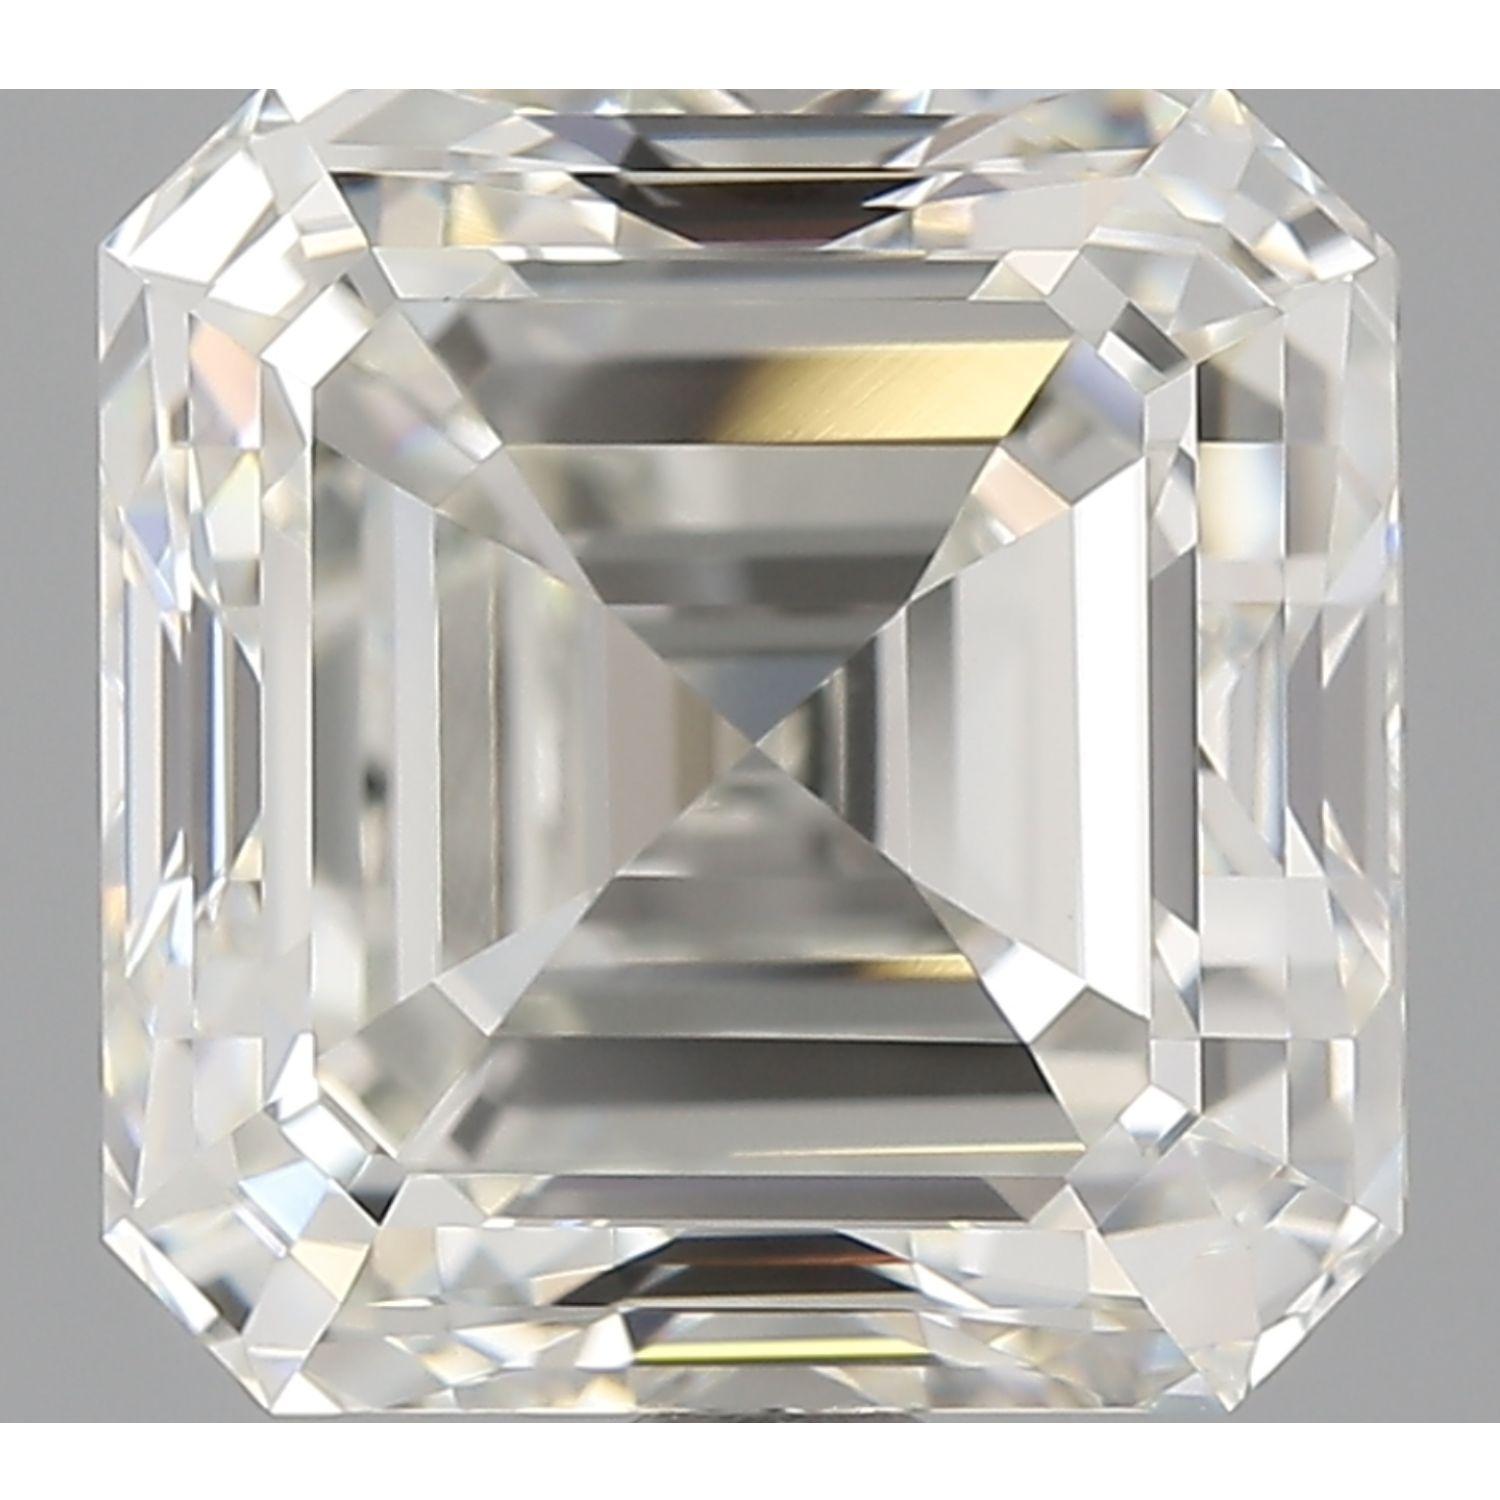 Customizable HRD certified 4.01 carat I color, VVS1 quality square emerald cut White Diamond, set in 18K White Gold. The design can be changed, currently sized US 7, can be altered. 
Please message us for more information